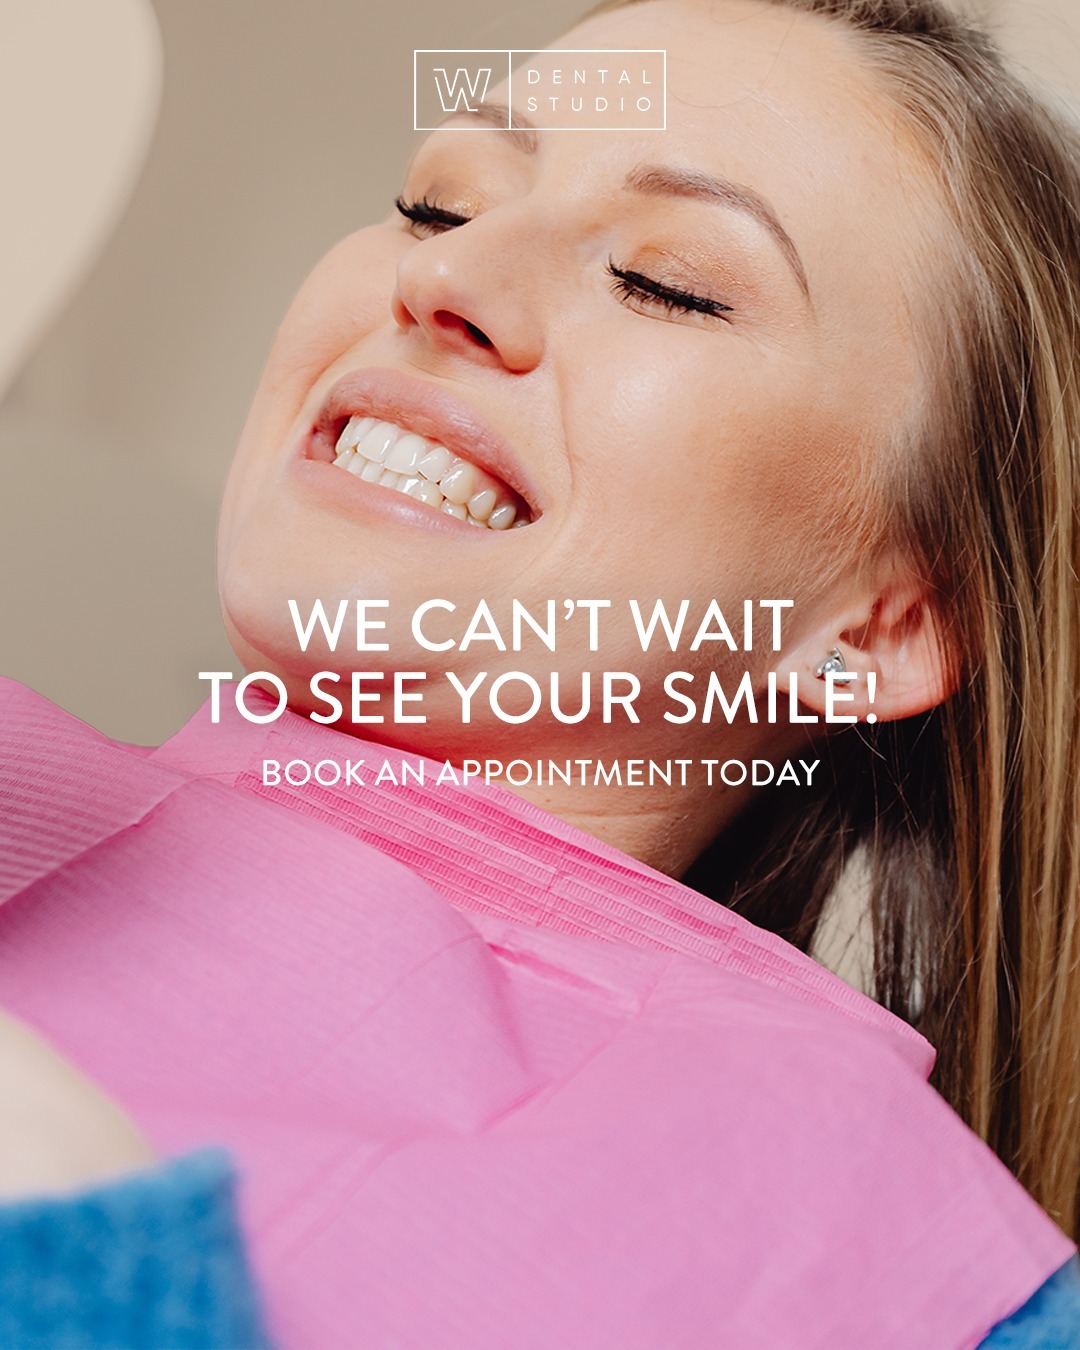 We CAN'T wait to see your smile! Set up an appointment with us today! 🦷

📞 613-564-3300
📍 270 Richmond Rd, Ottawa, ON
💻 https://www.wdentalstudio.com 
📧 info@wdentalstudio.com